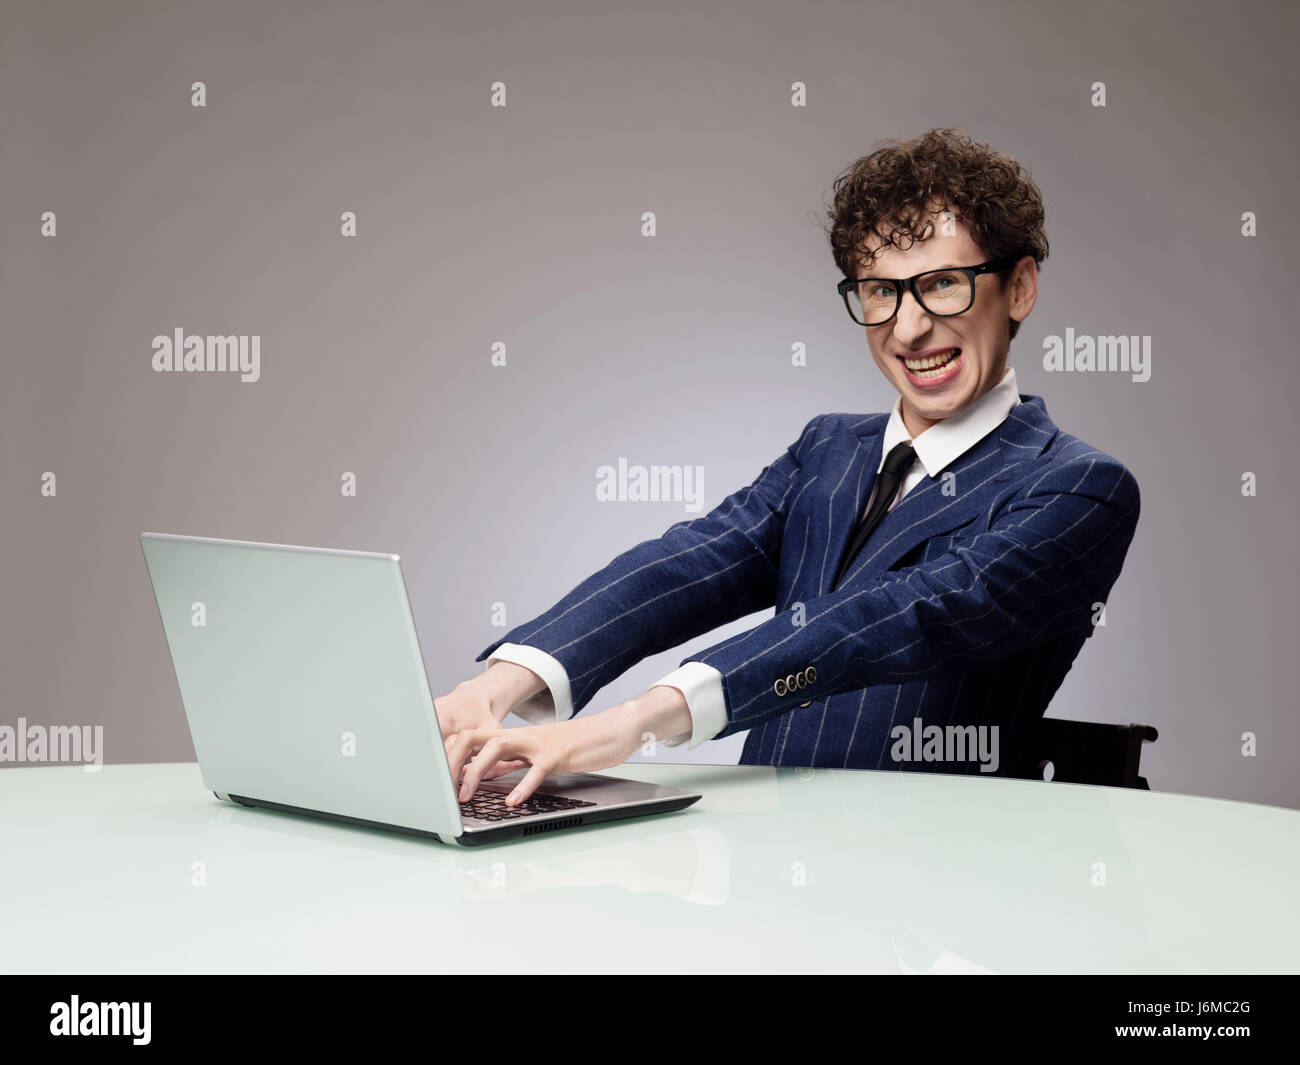 Funny business man geek using laptop with evil genius facial expression Stock Photo